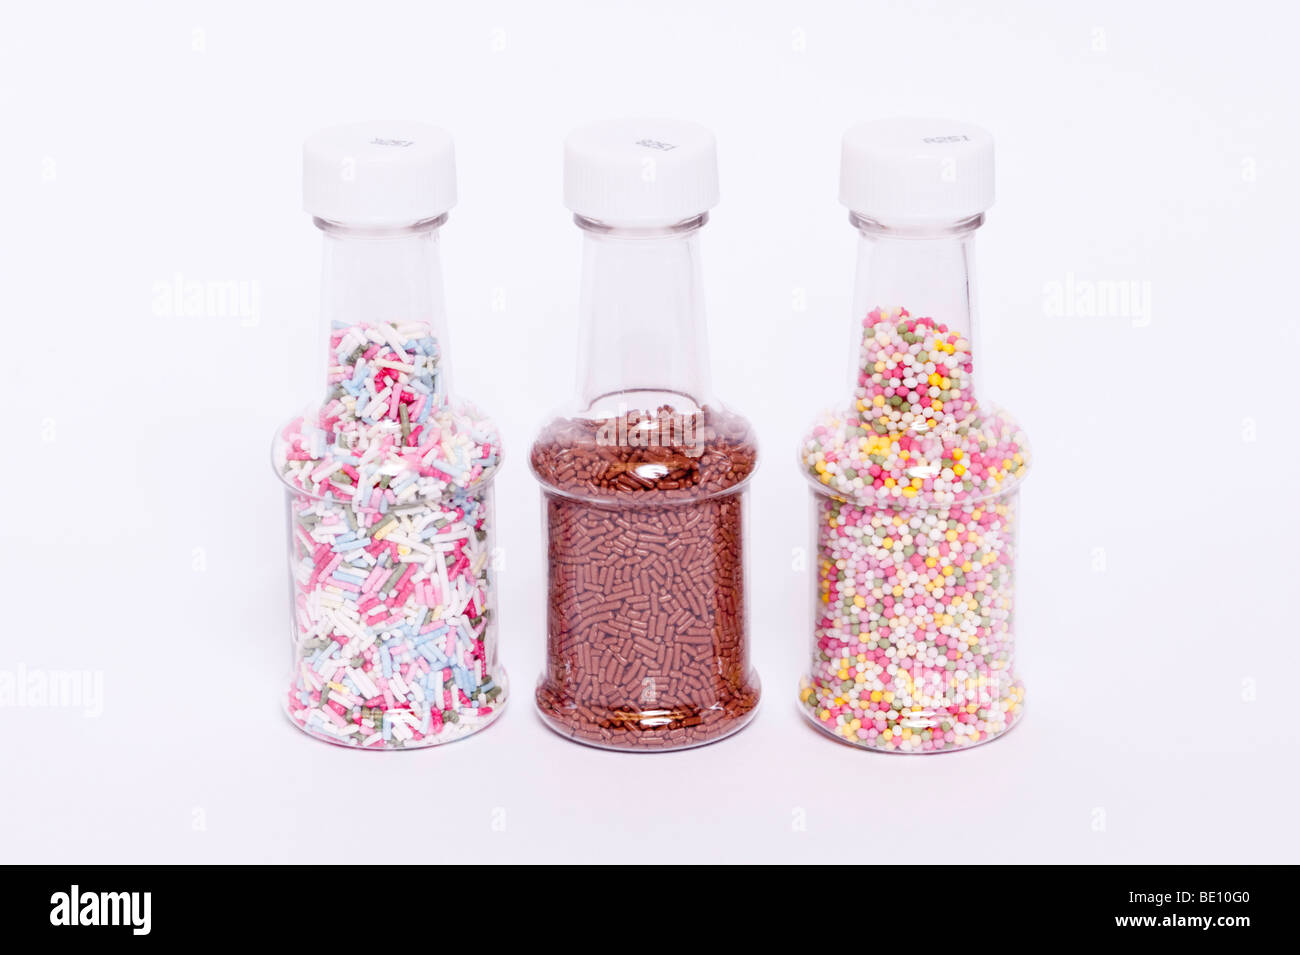 A close up of 3 jars of coloured hundreds and thousands cake decorations on a white background Stock Photo